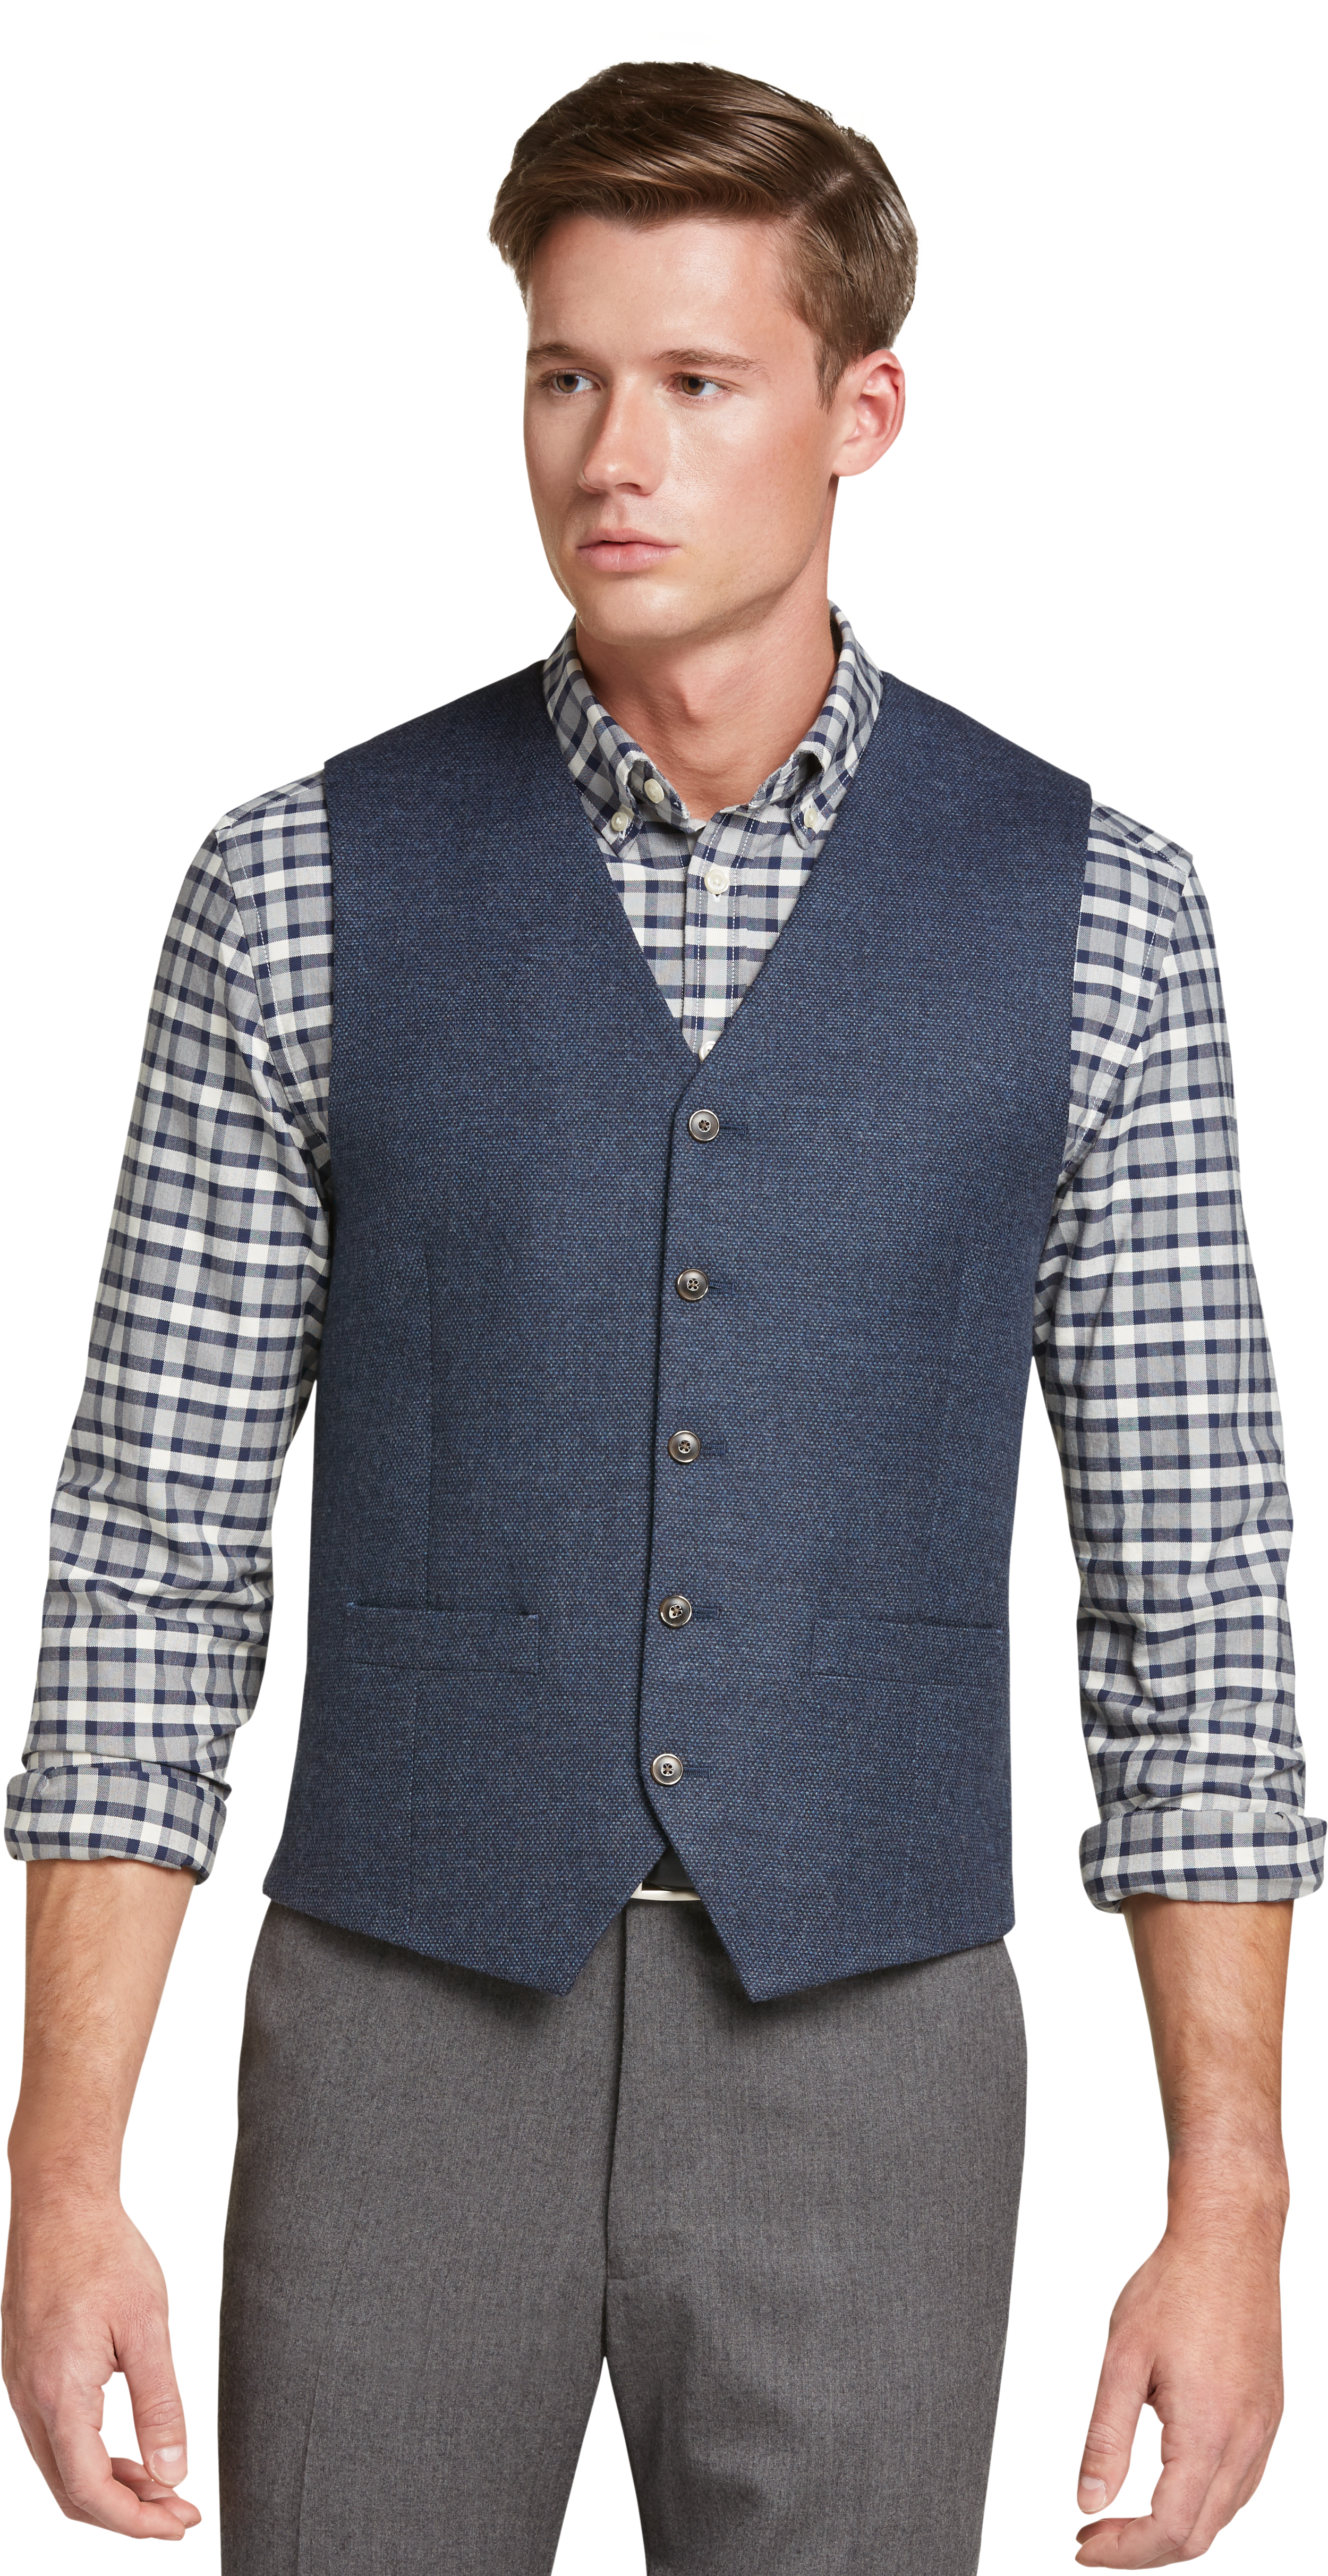 1905 Collection Tailored Fit Birdseye Vest CLEARANCE - All Clearance ...